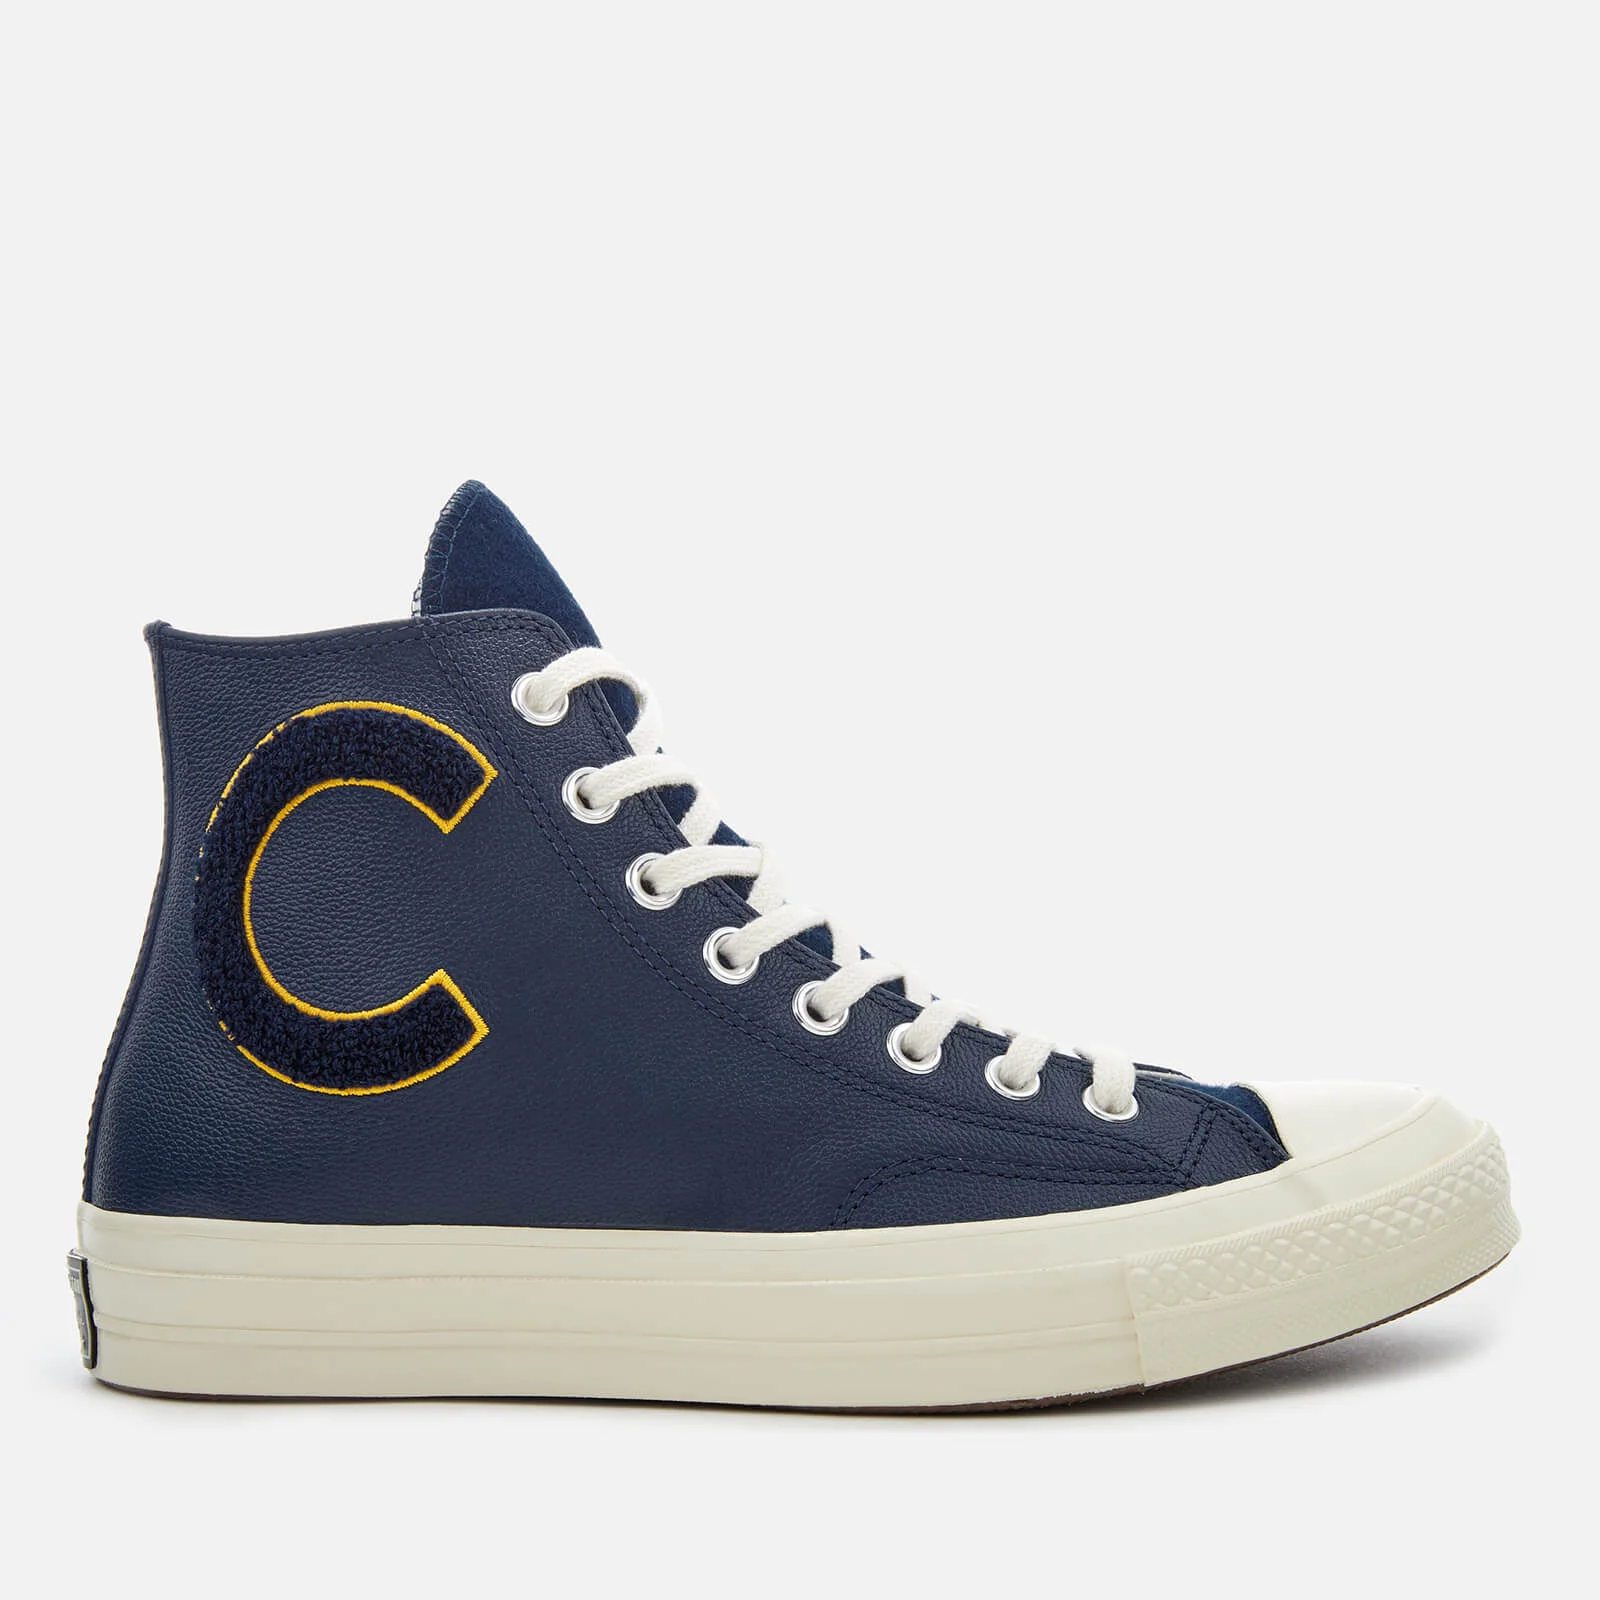 Converse Men's Chuck Taylor All Star 70 Hi-Top Trainers - Navy/Mineral Yellow/Egret Image 1